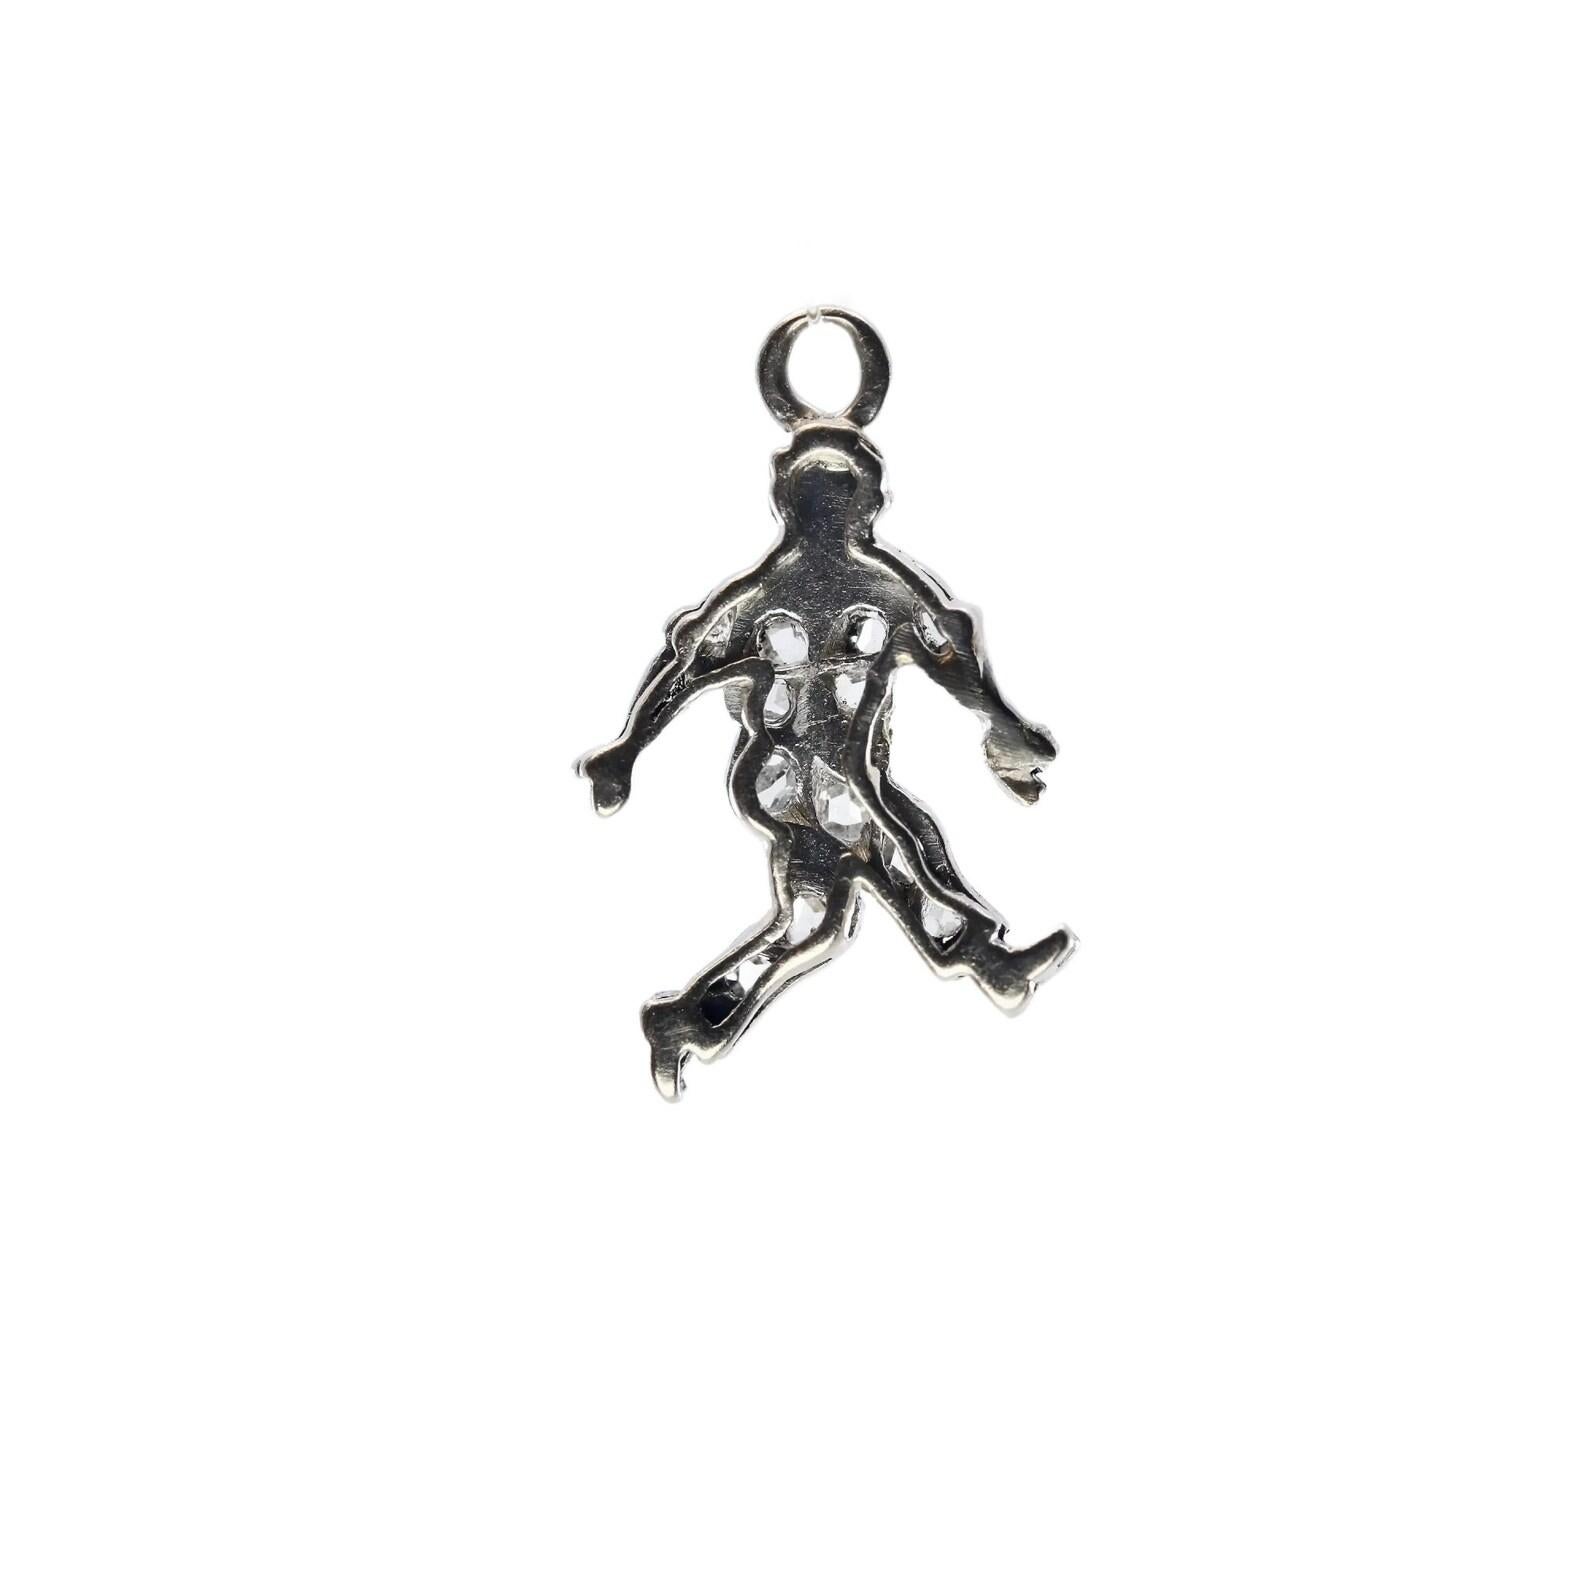 A handmade Art Deco period pave diamond walking man charm in platinum. Set with thirteen rose cut diamonds weighing a combined 0.15 carats and grading as H color, VS2 clarity. Beautifully hand crafted this wonderfully detailed charm measures just